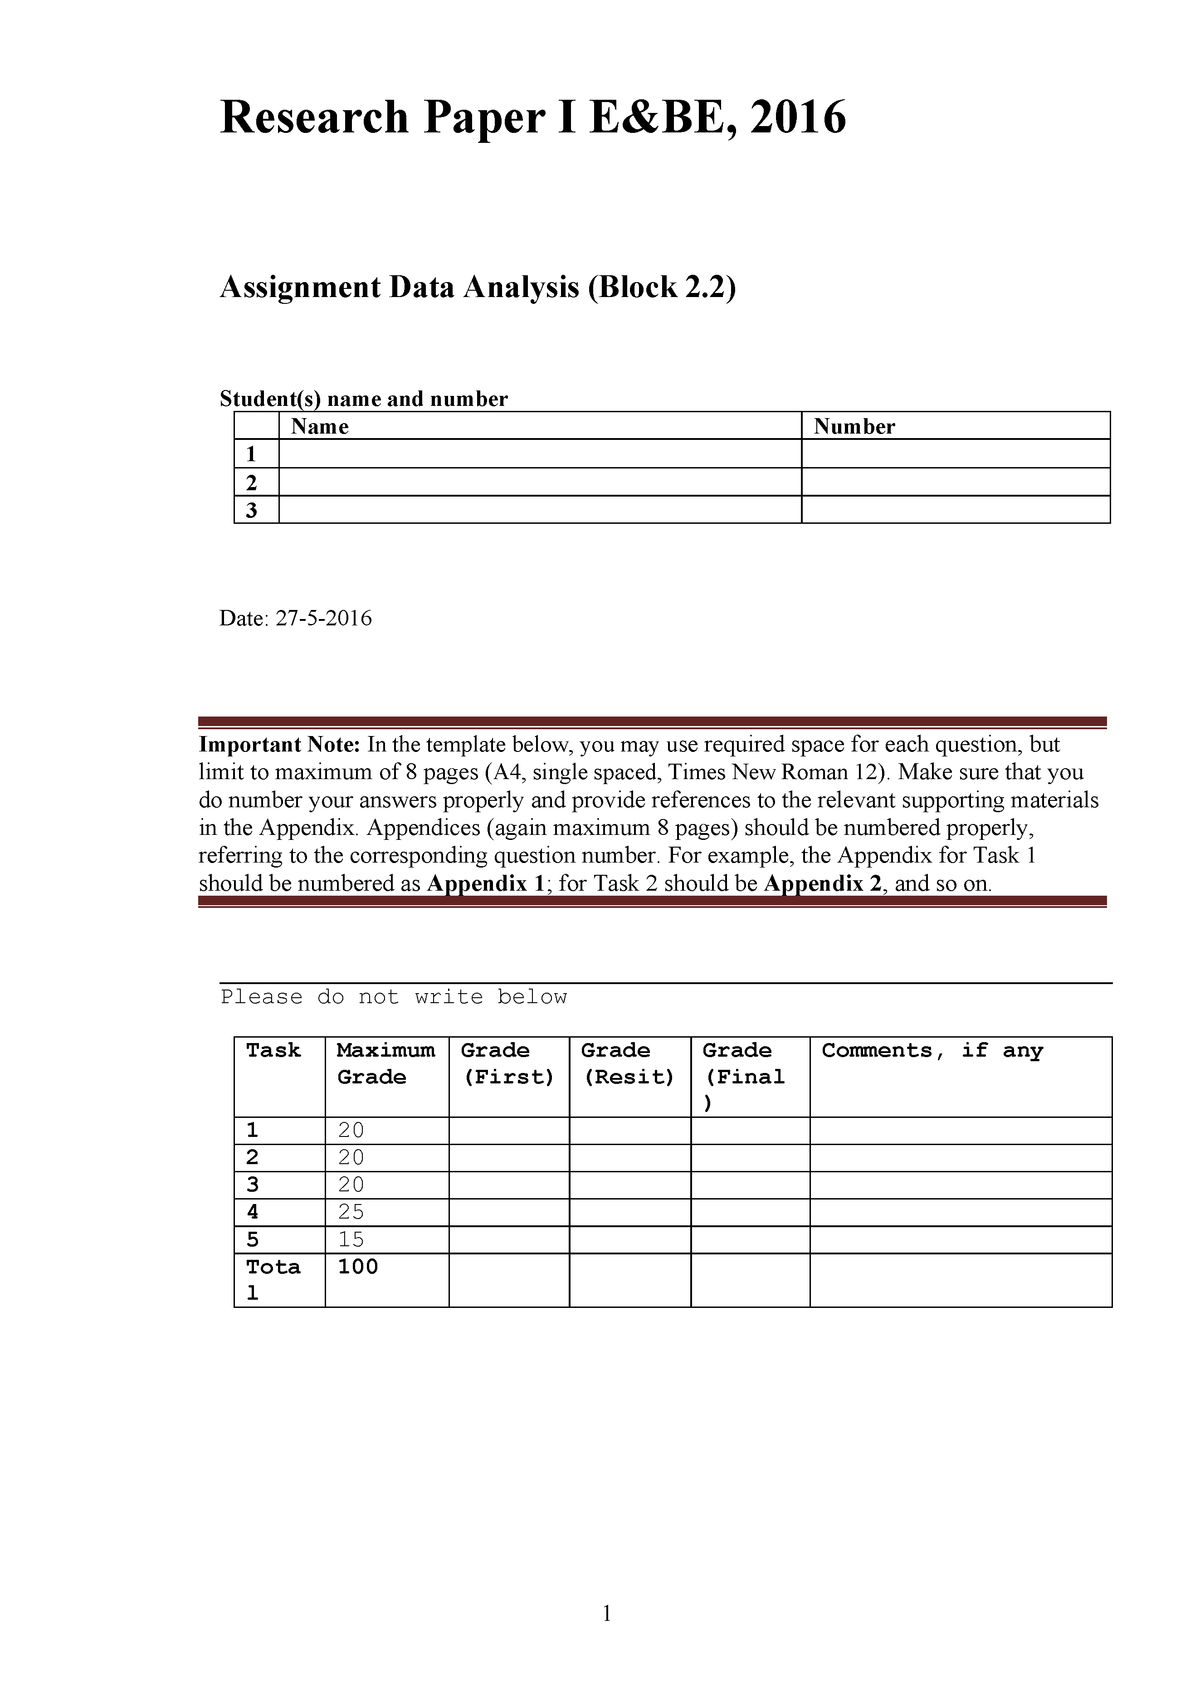 Research Paper "Data analysis assignment" - EBP035A05 ...